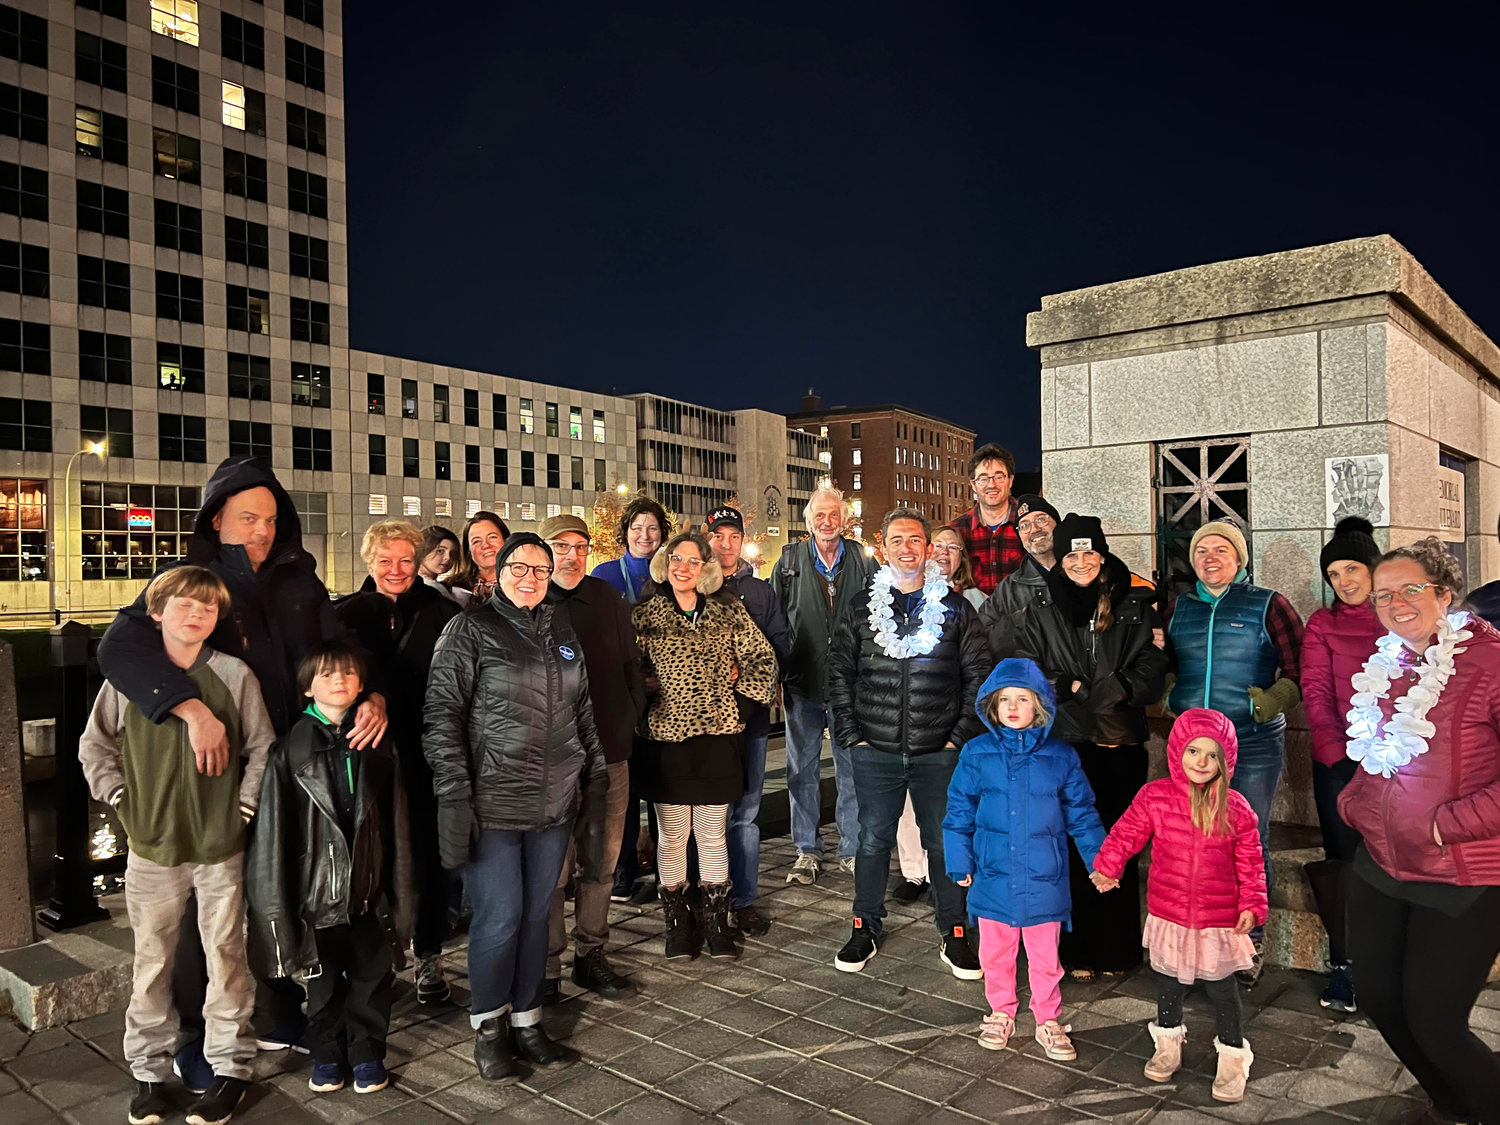 A contingent of 25 hearty souls took a full moon walk in downtown Providence on Nov.8